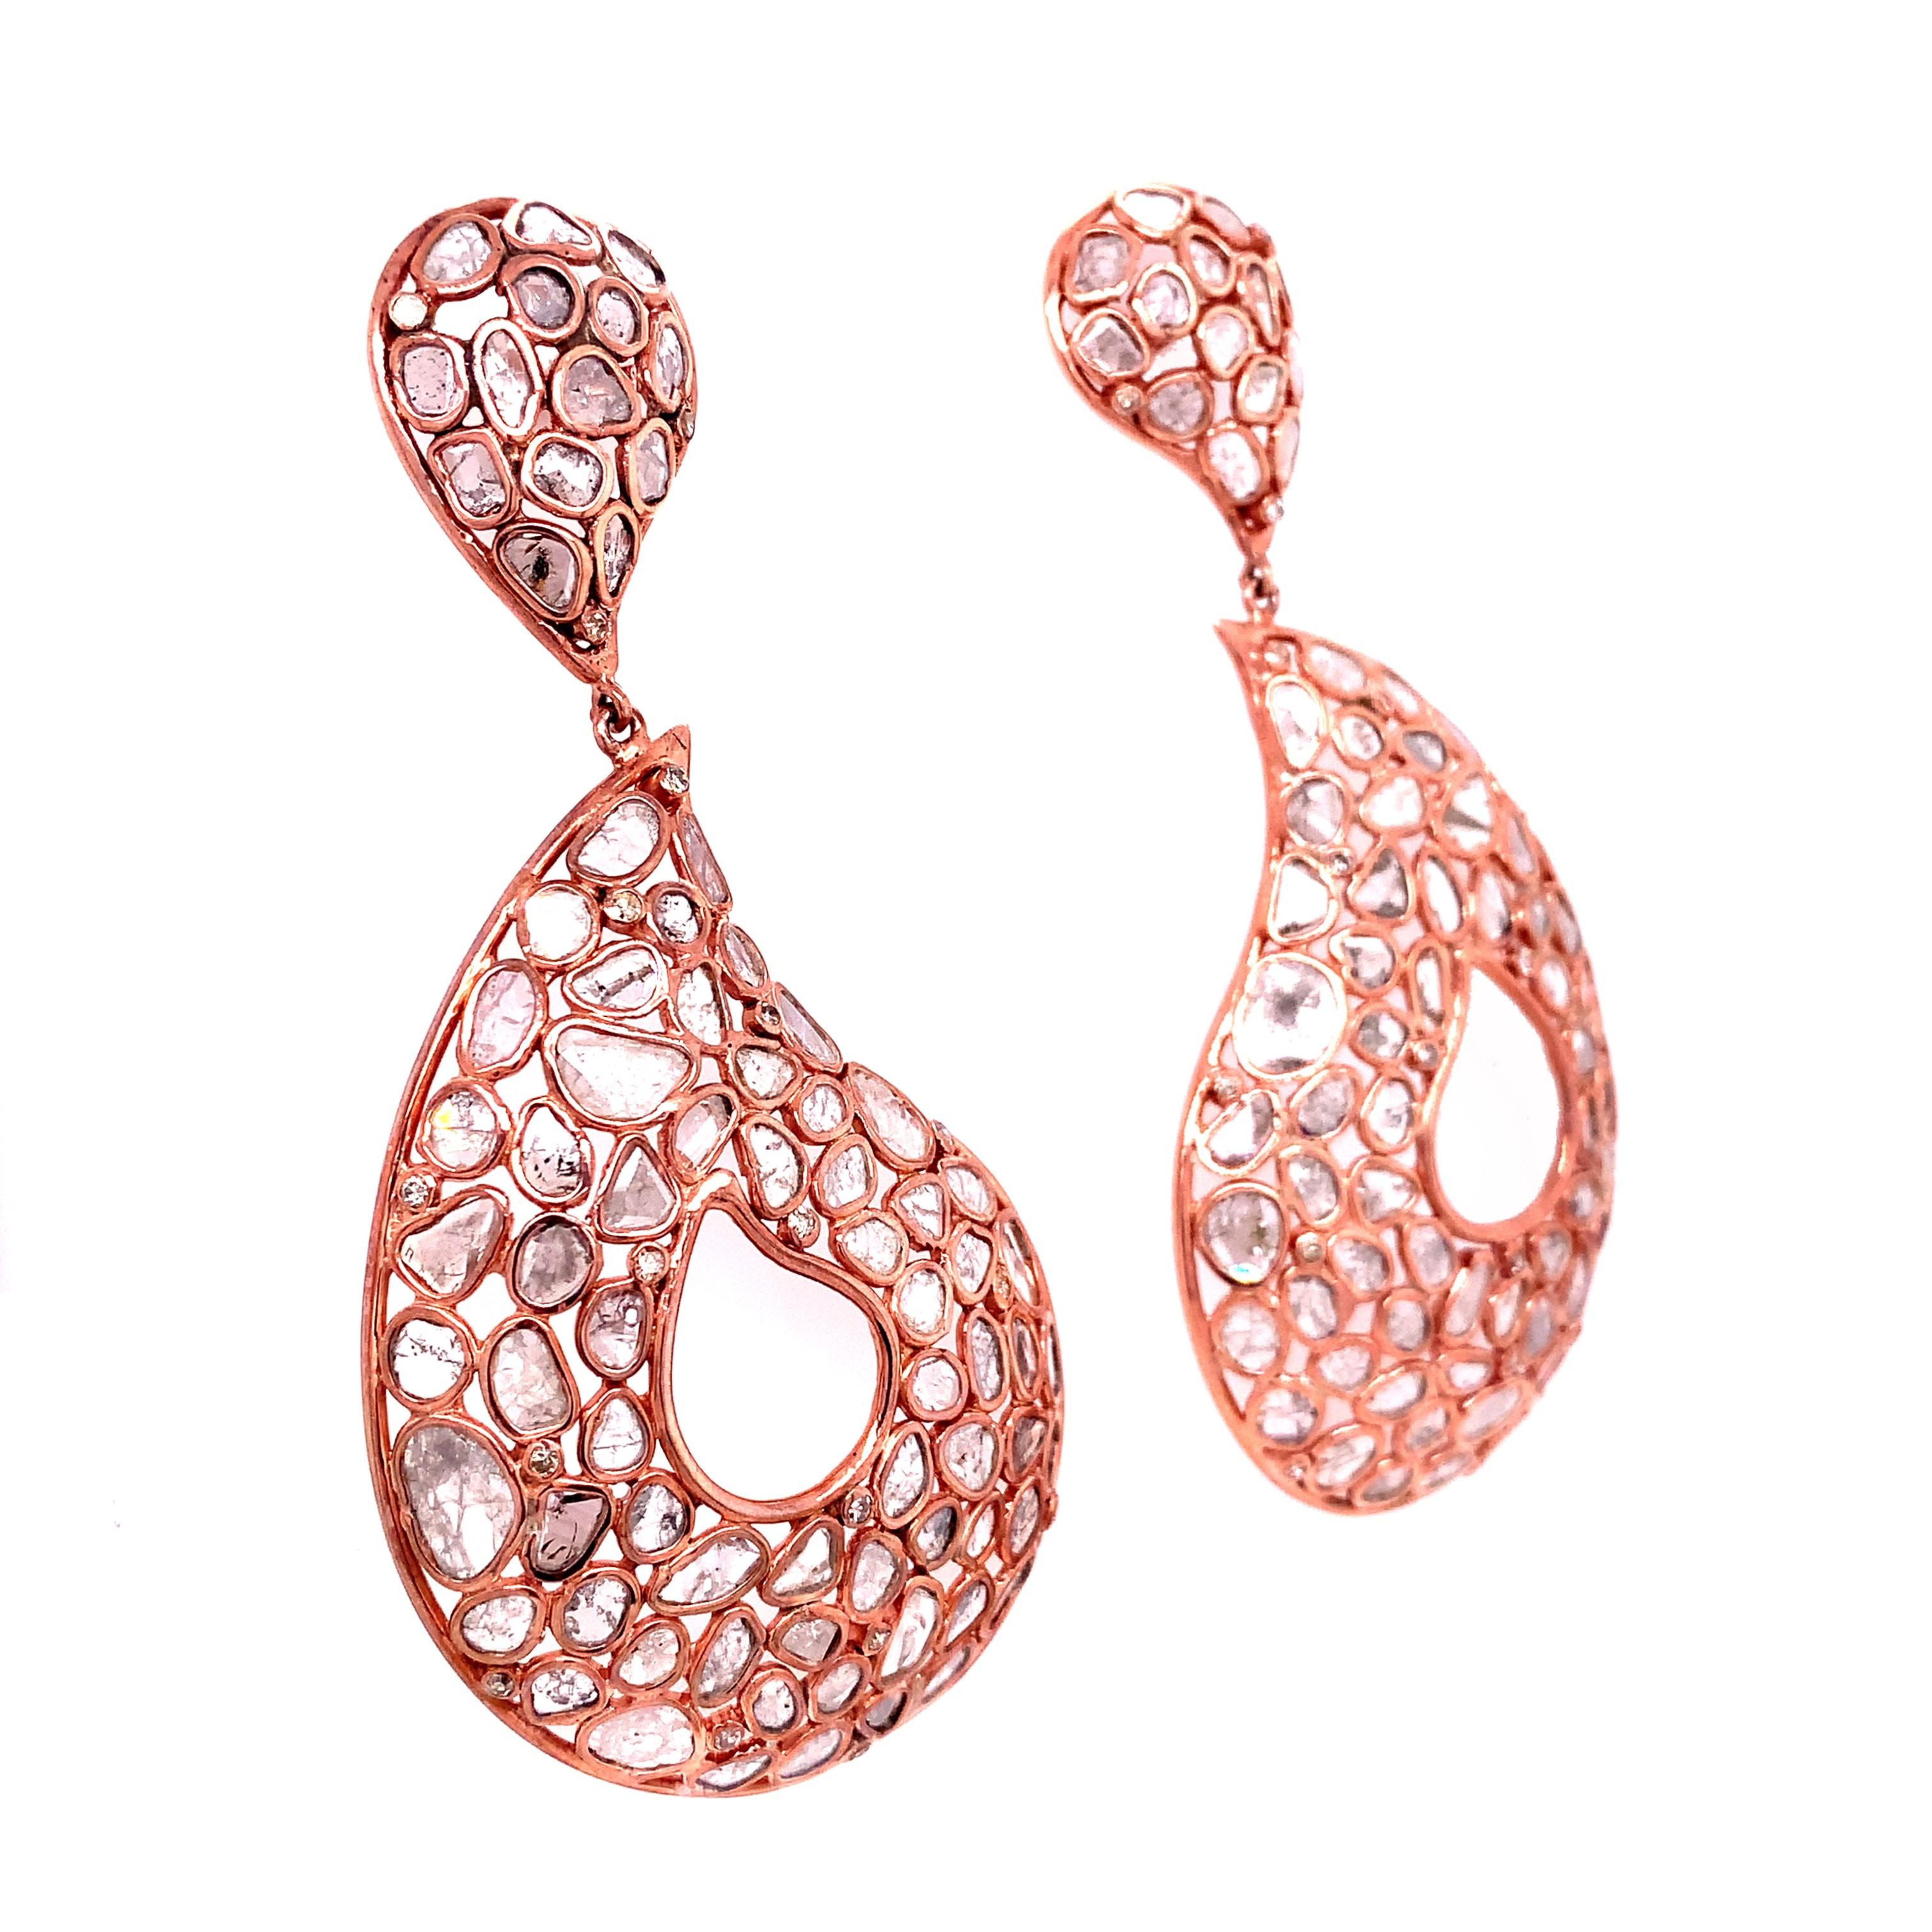 Nebula Collection

Grayish colored Slice Diamond crescent moon tear drop shaped earring set in Sterling Silver and 14K Rose gold plated.

Slice Diamond: 9.97ct total weight.
Diamond: 0.49ct total weight.